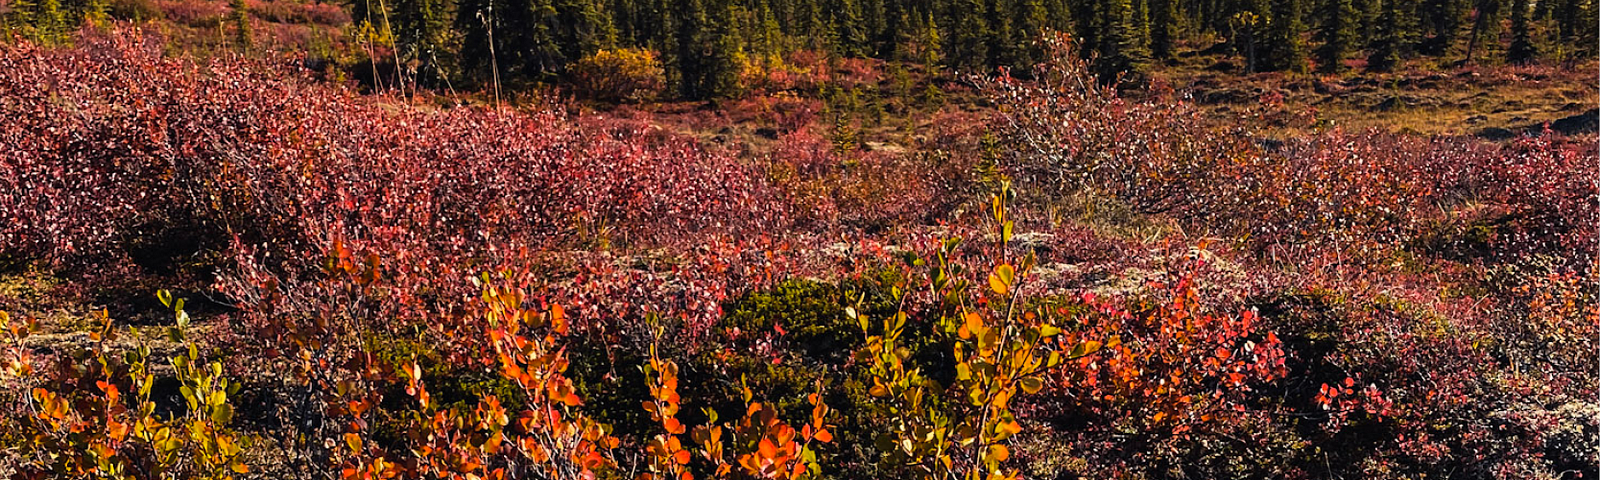 Photo of fall tundra with mountains in the background. At bottom are five color blocks in maroon, orange, and olive shades.